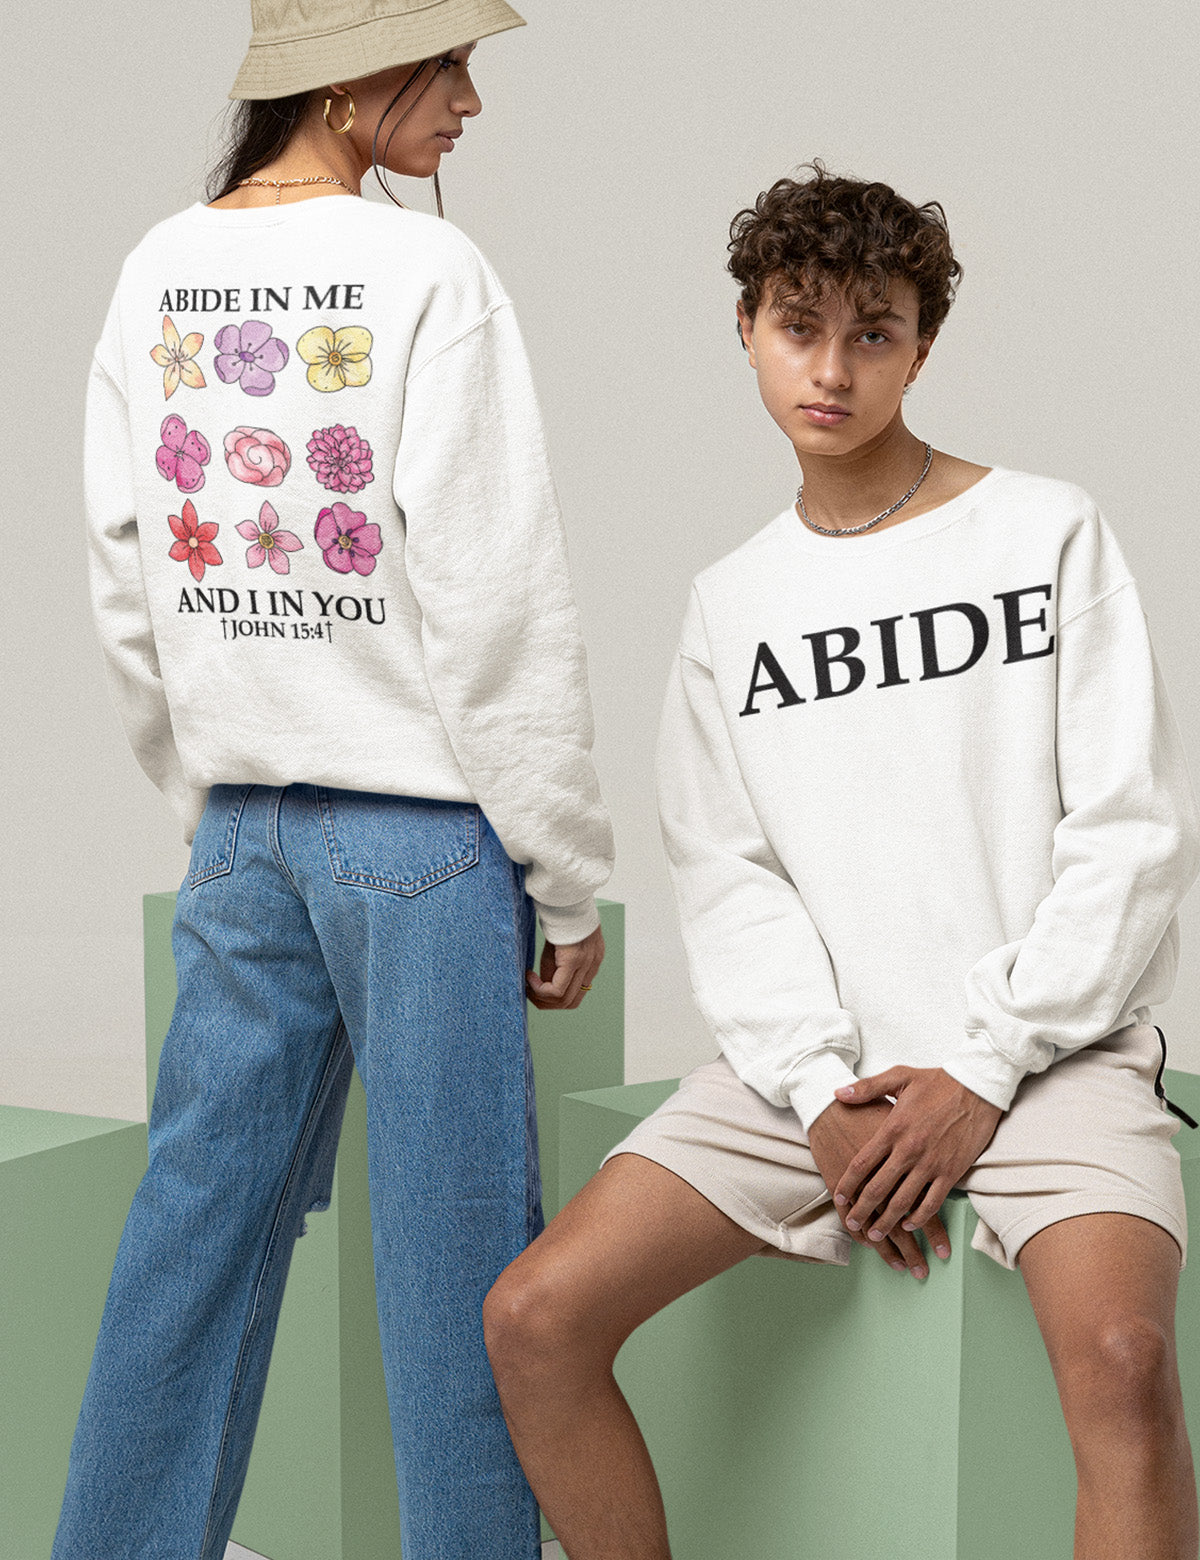 Abide in Me Faith Based Front and Back print Bible Verse Sweatshirt